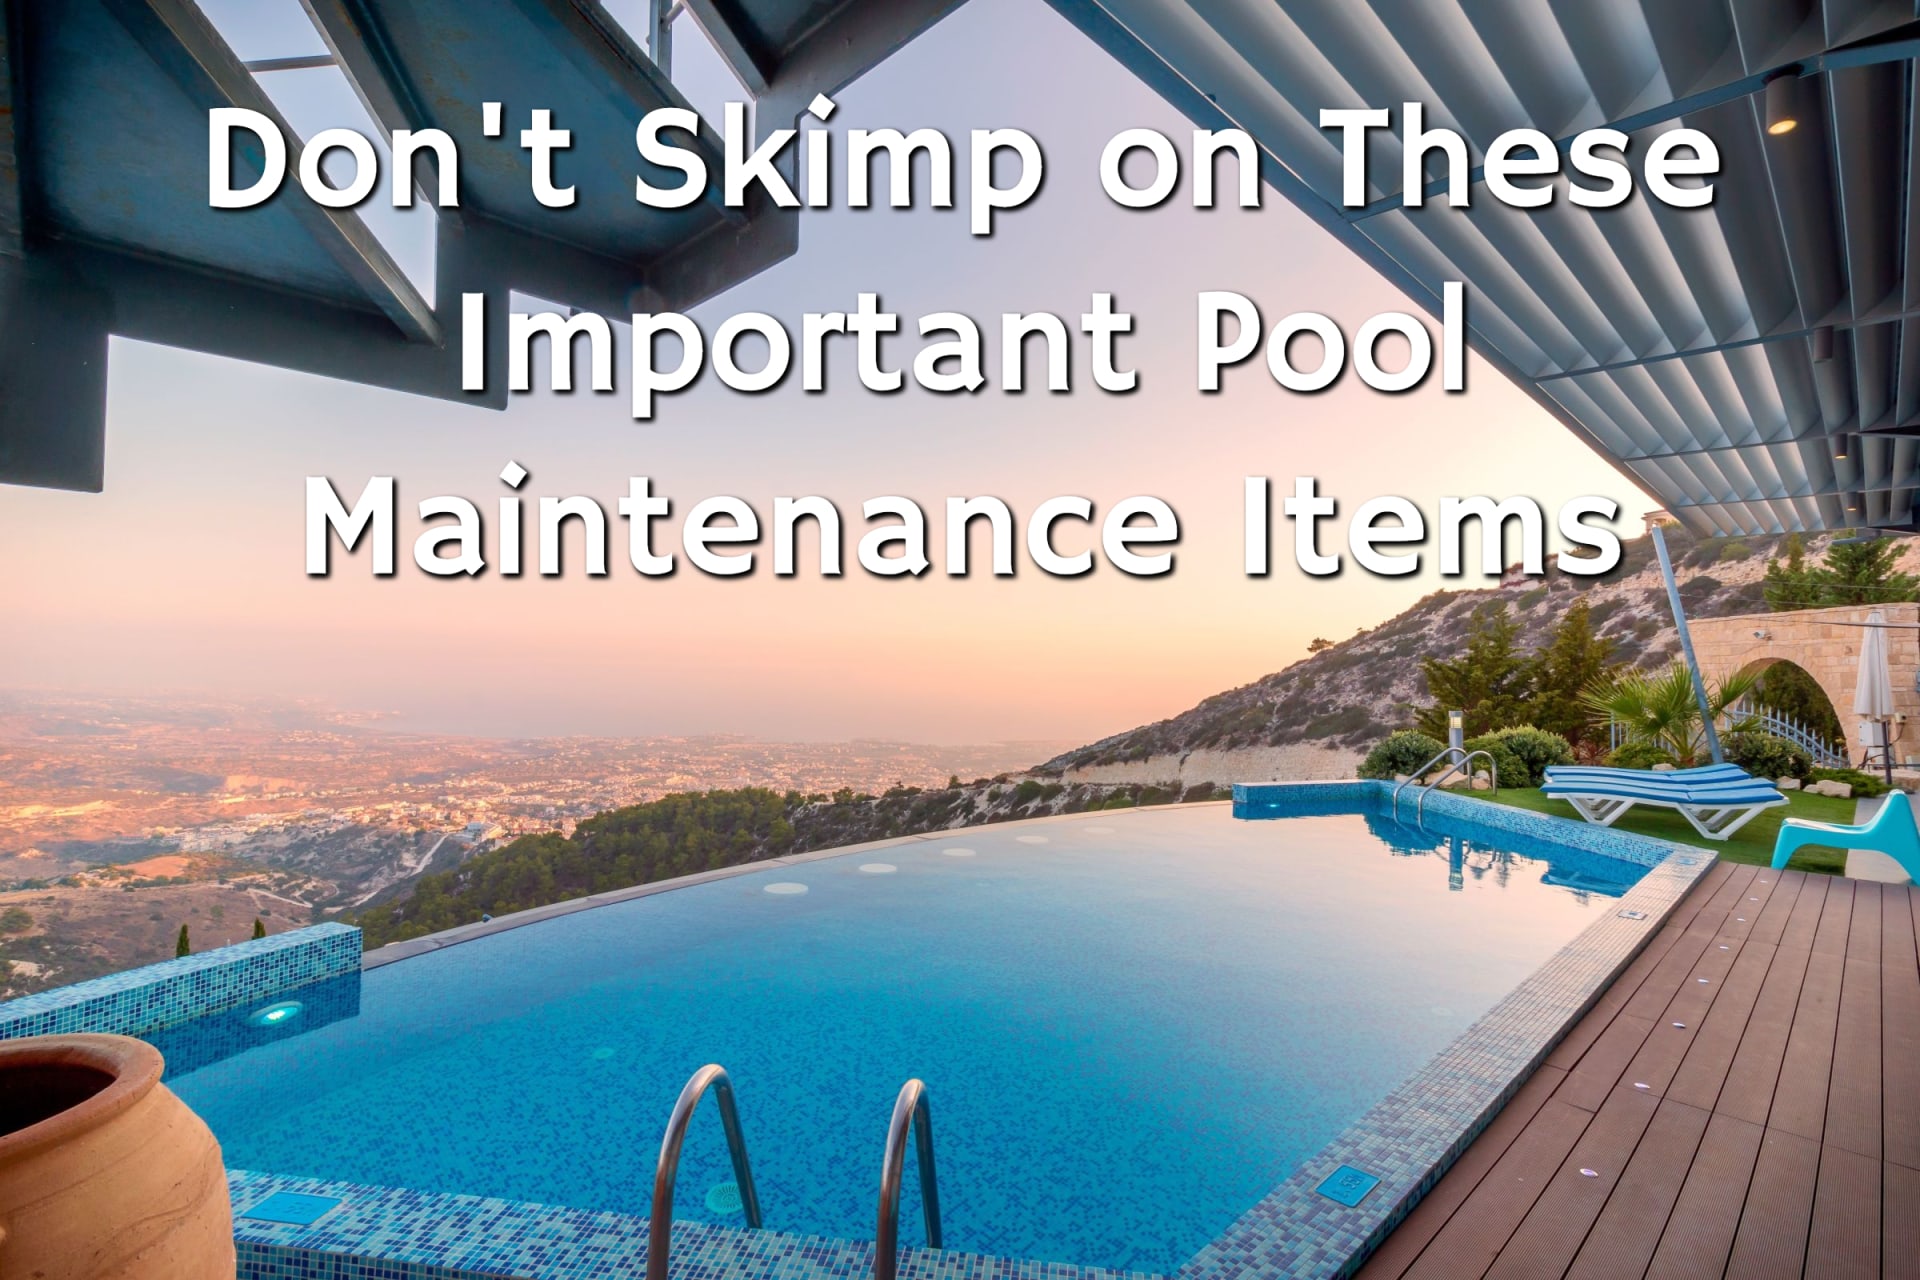 A beautifully maintained swimming pool with proper pool maintenance